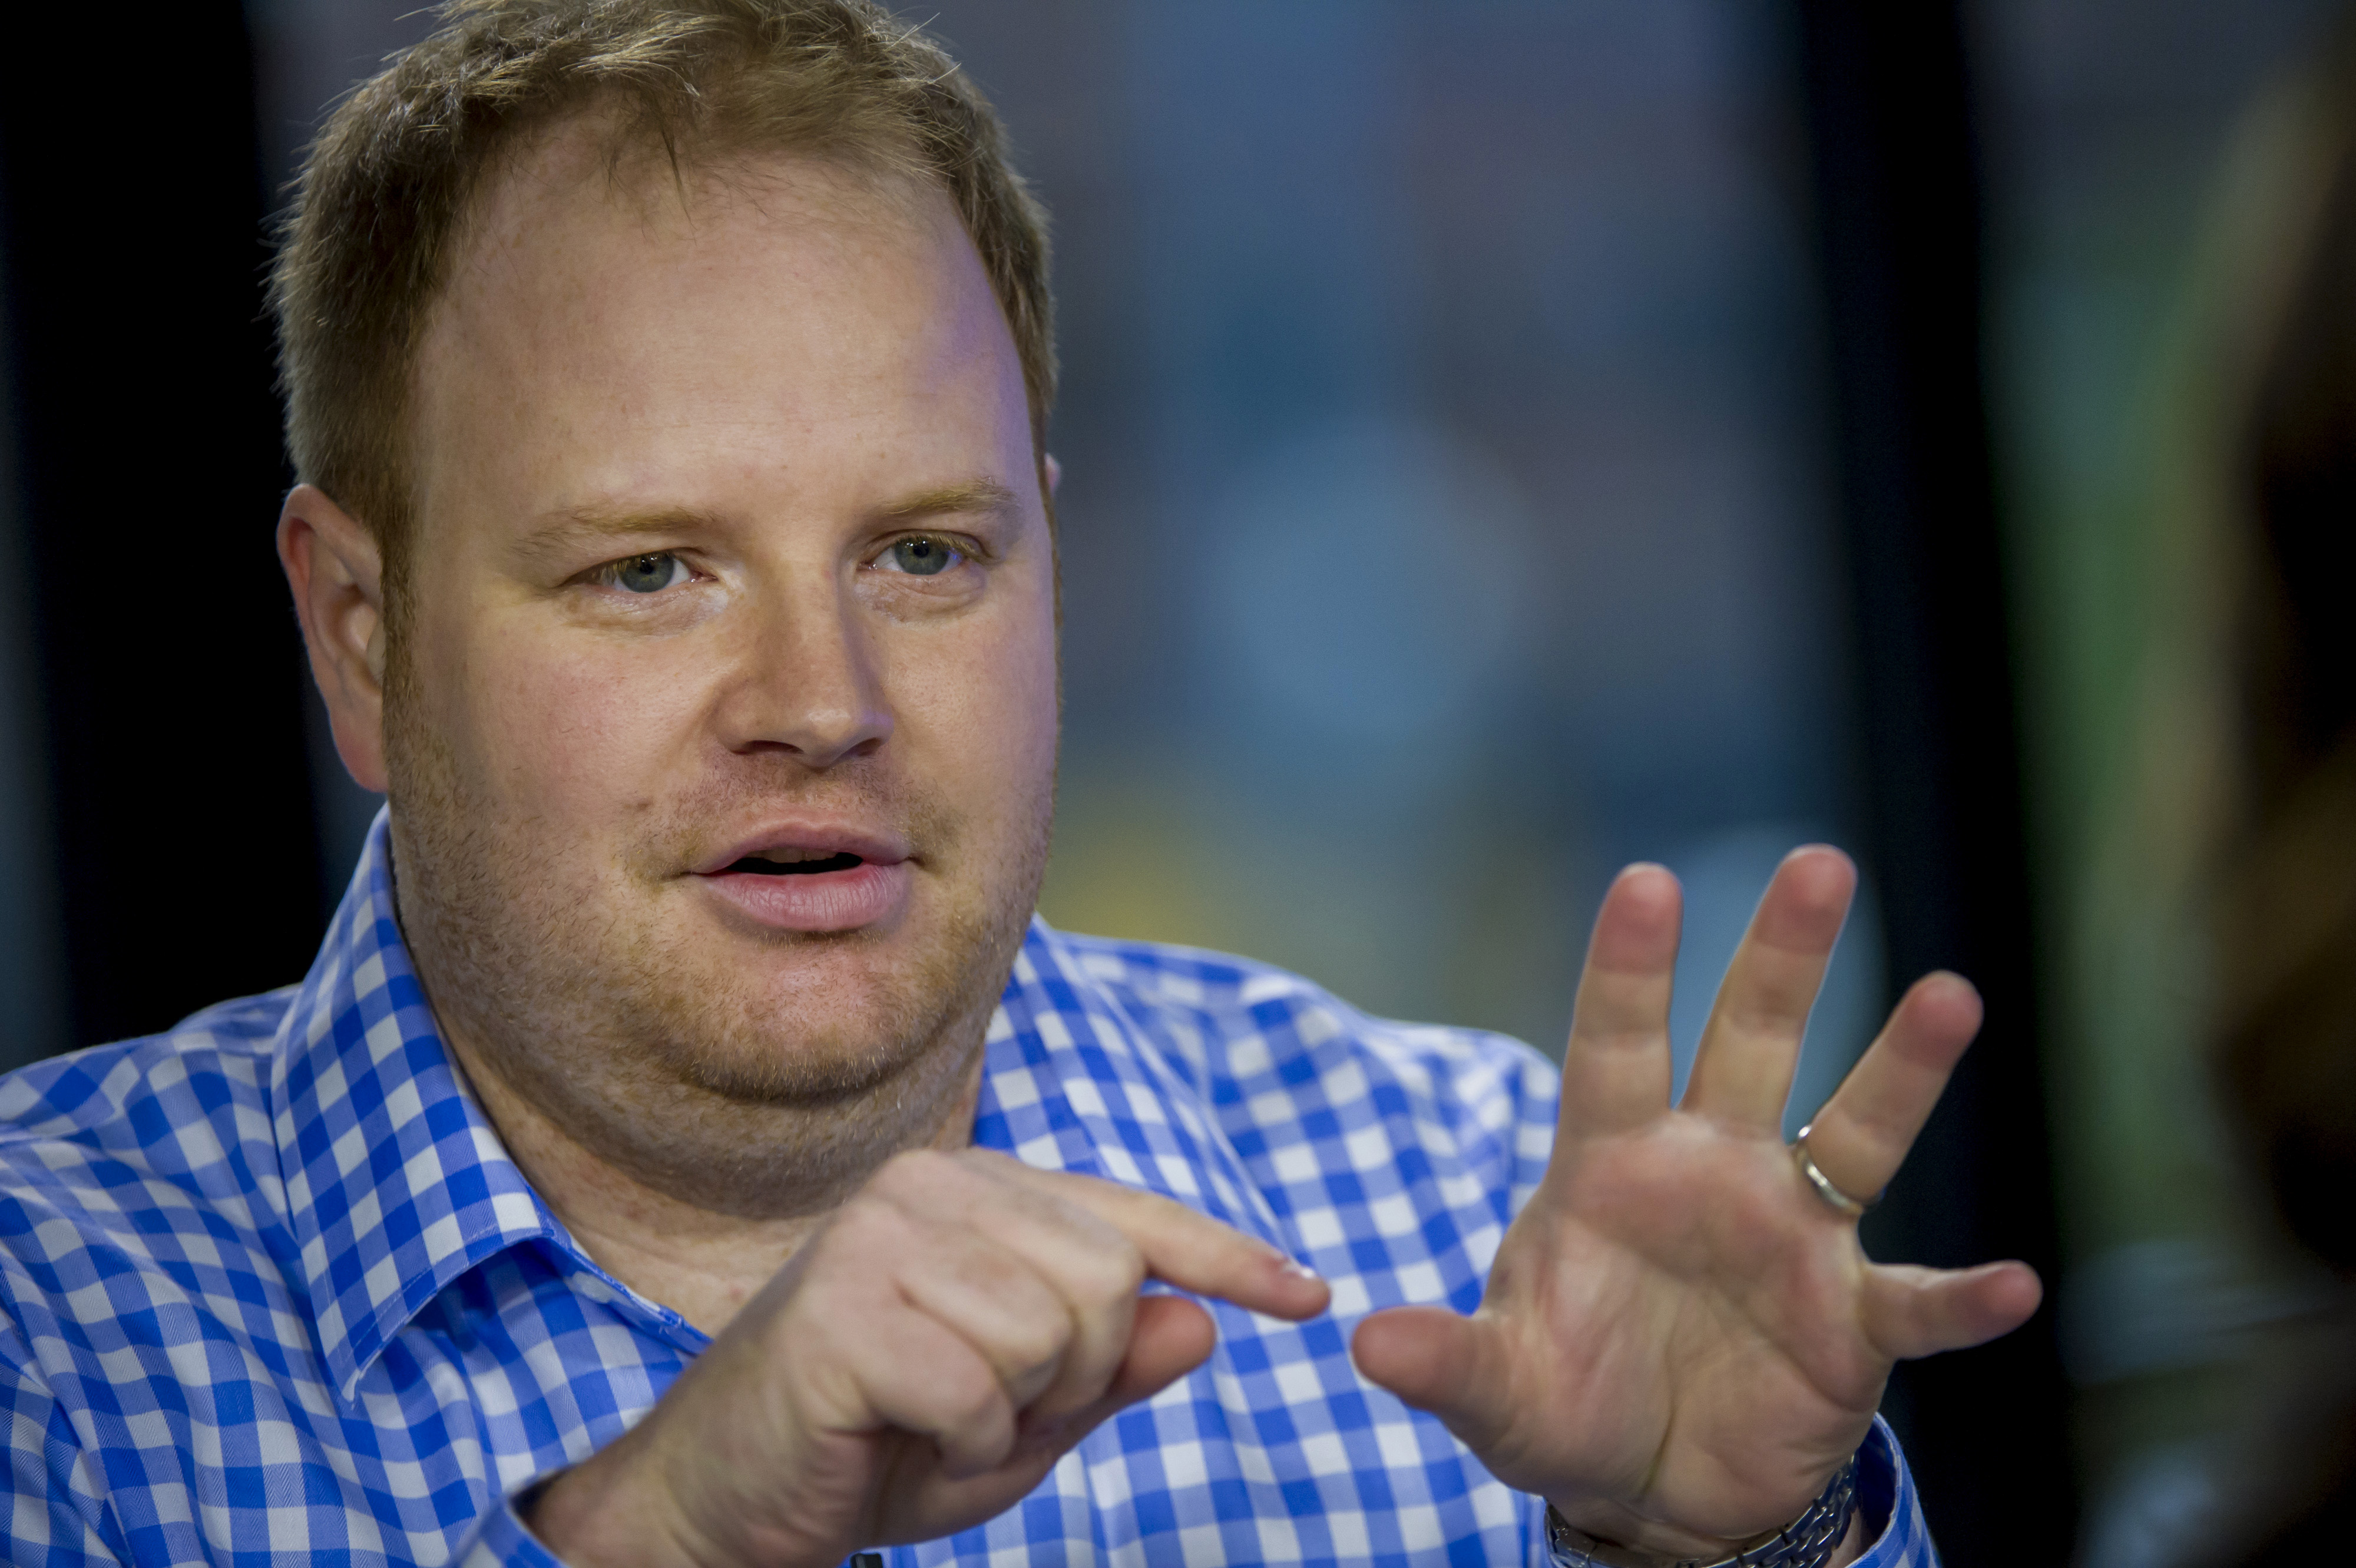 Zenefits Chief Executive Officer Parker Conrad And Chief Operating Officer David Sacks Interview